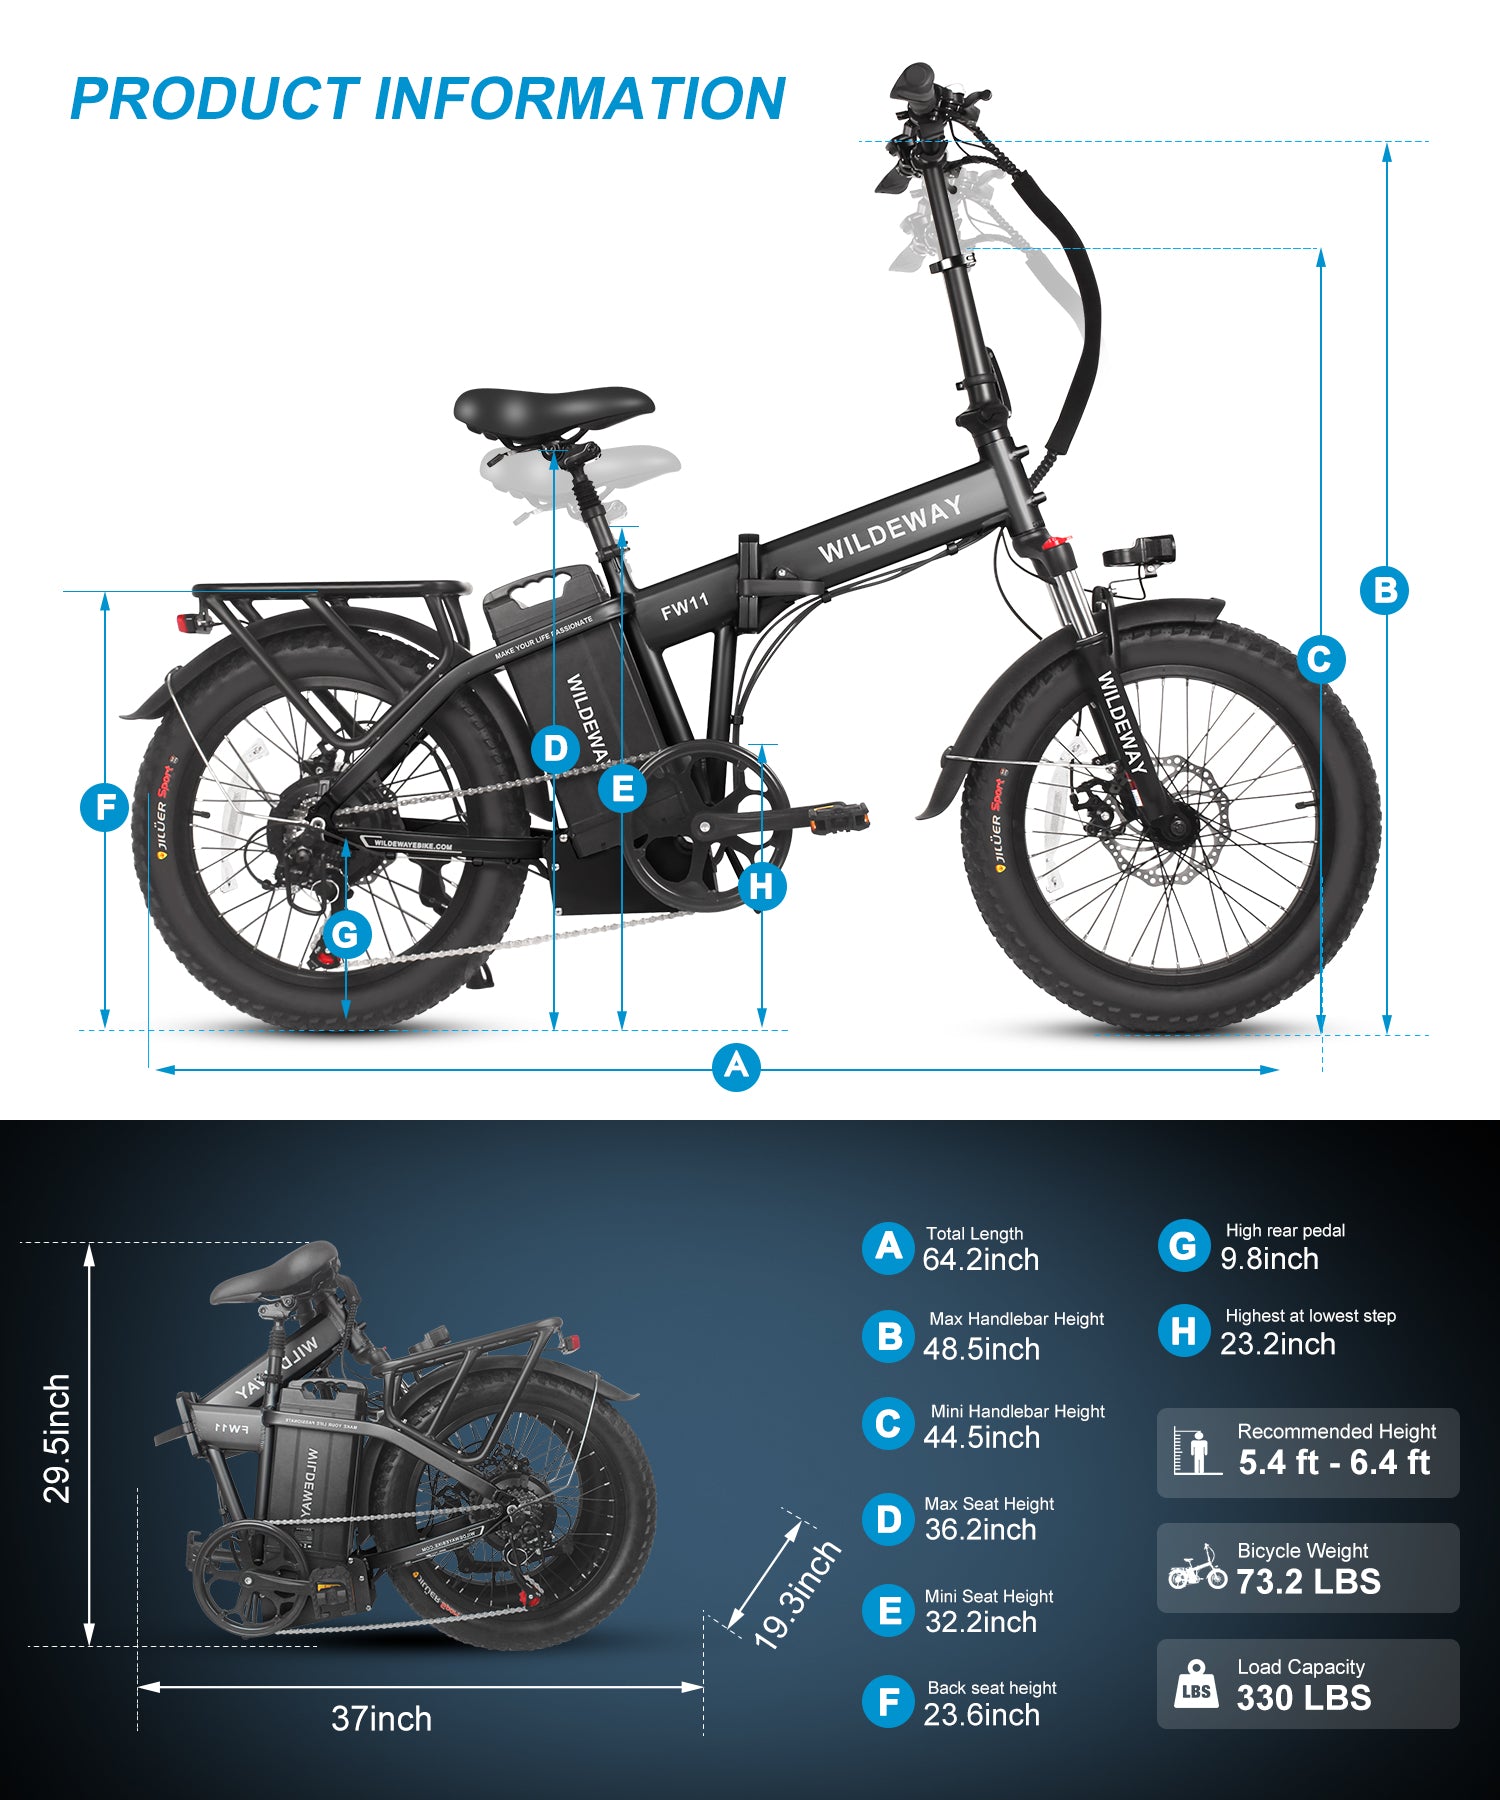 Wildeway FW11 3.0 foldable electric bicycle details